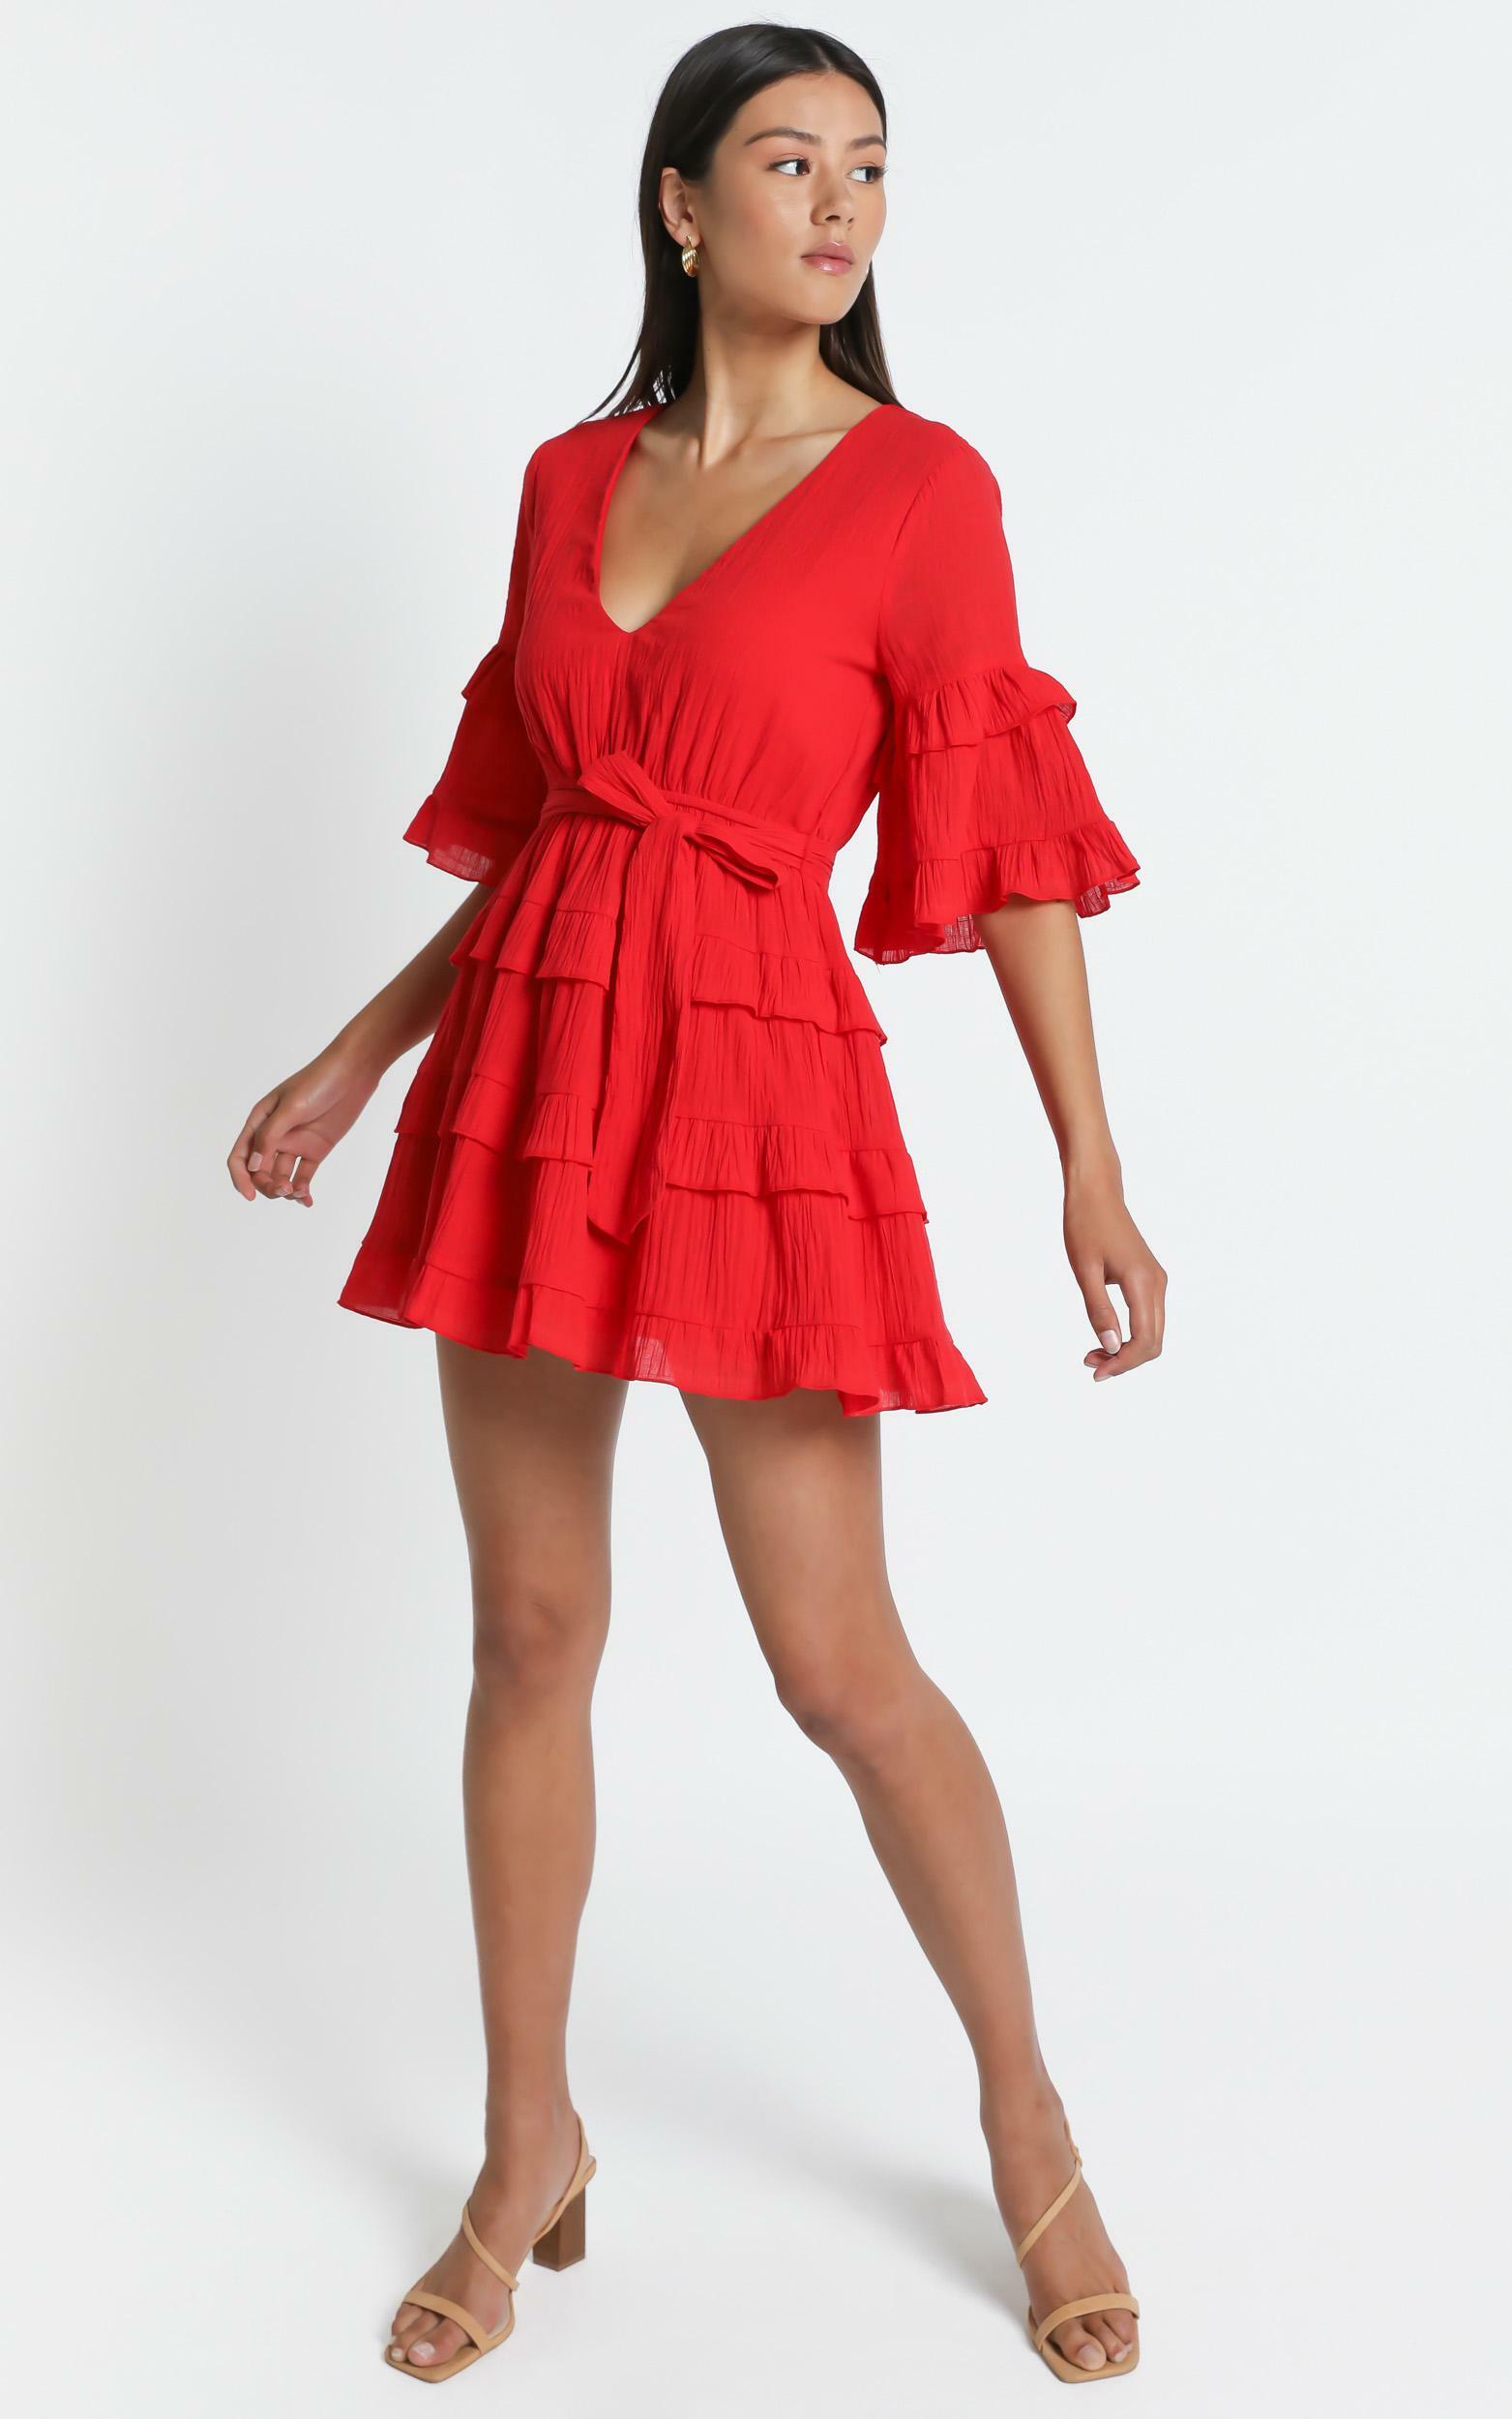 Meet Me In The Sun Tie Waist Tiered Mini Dress in Red - 20, RED5, hi-res image number null